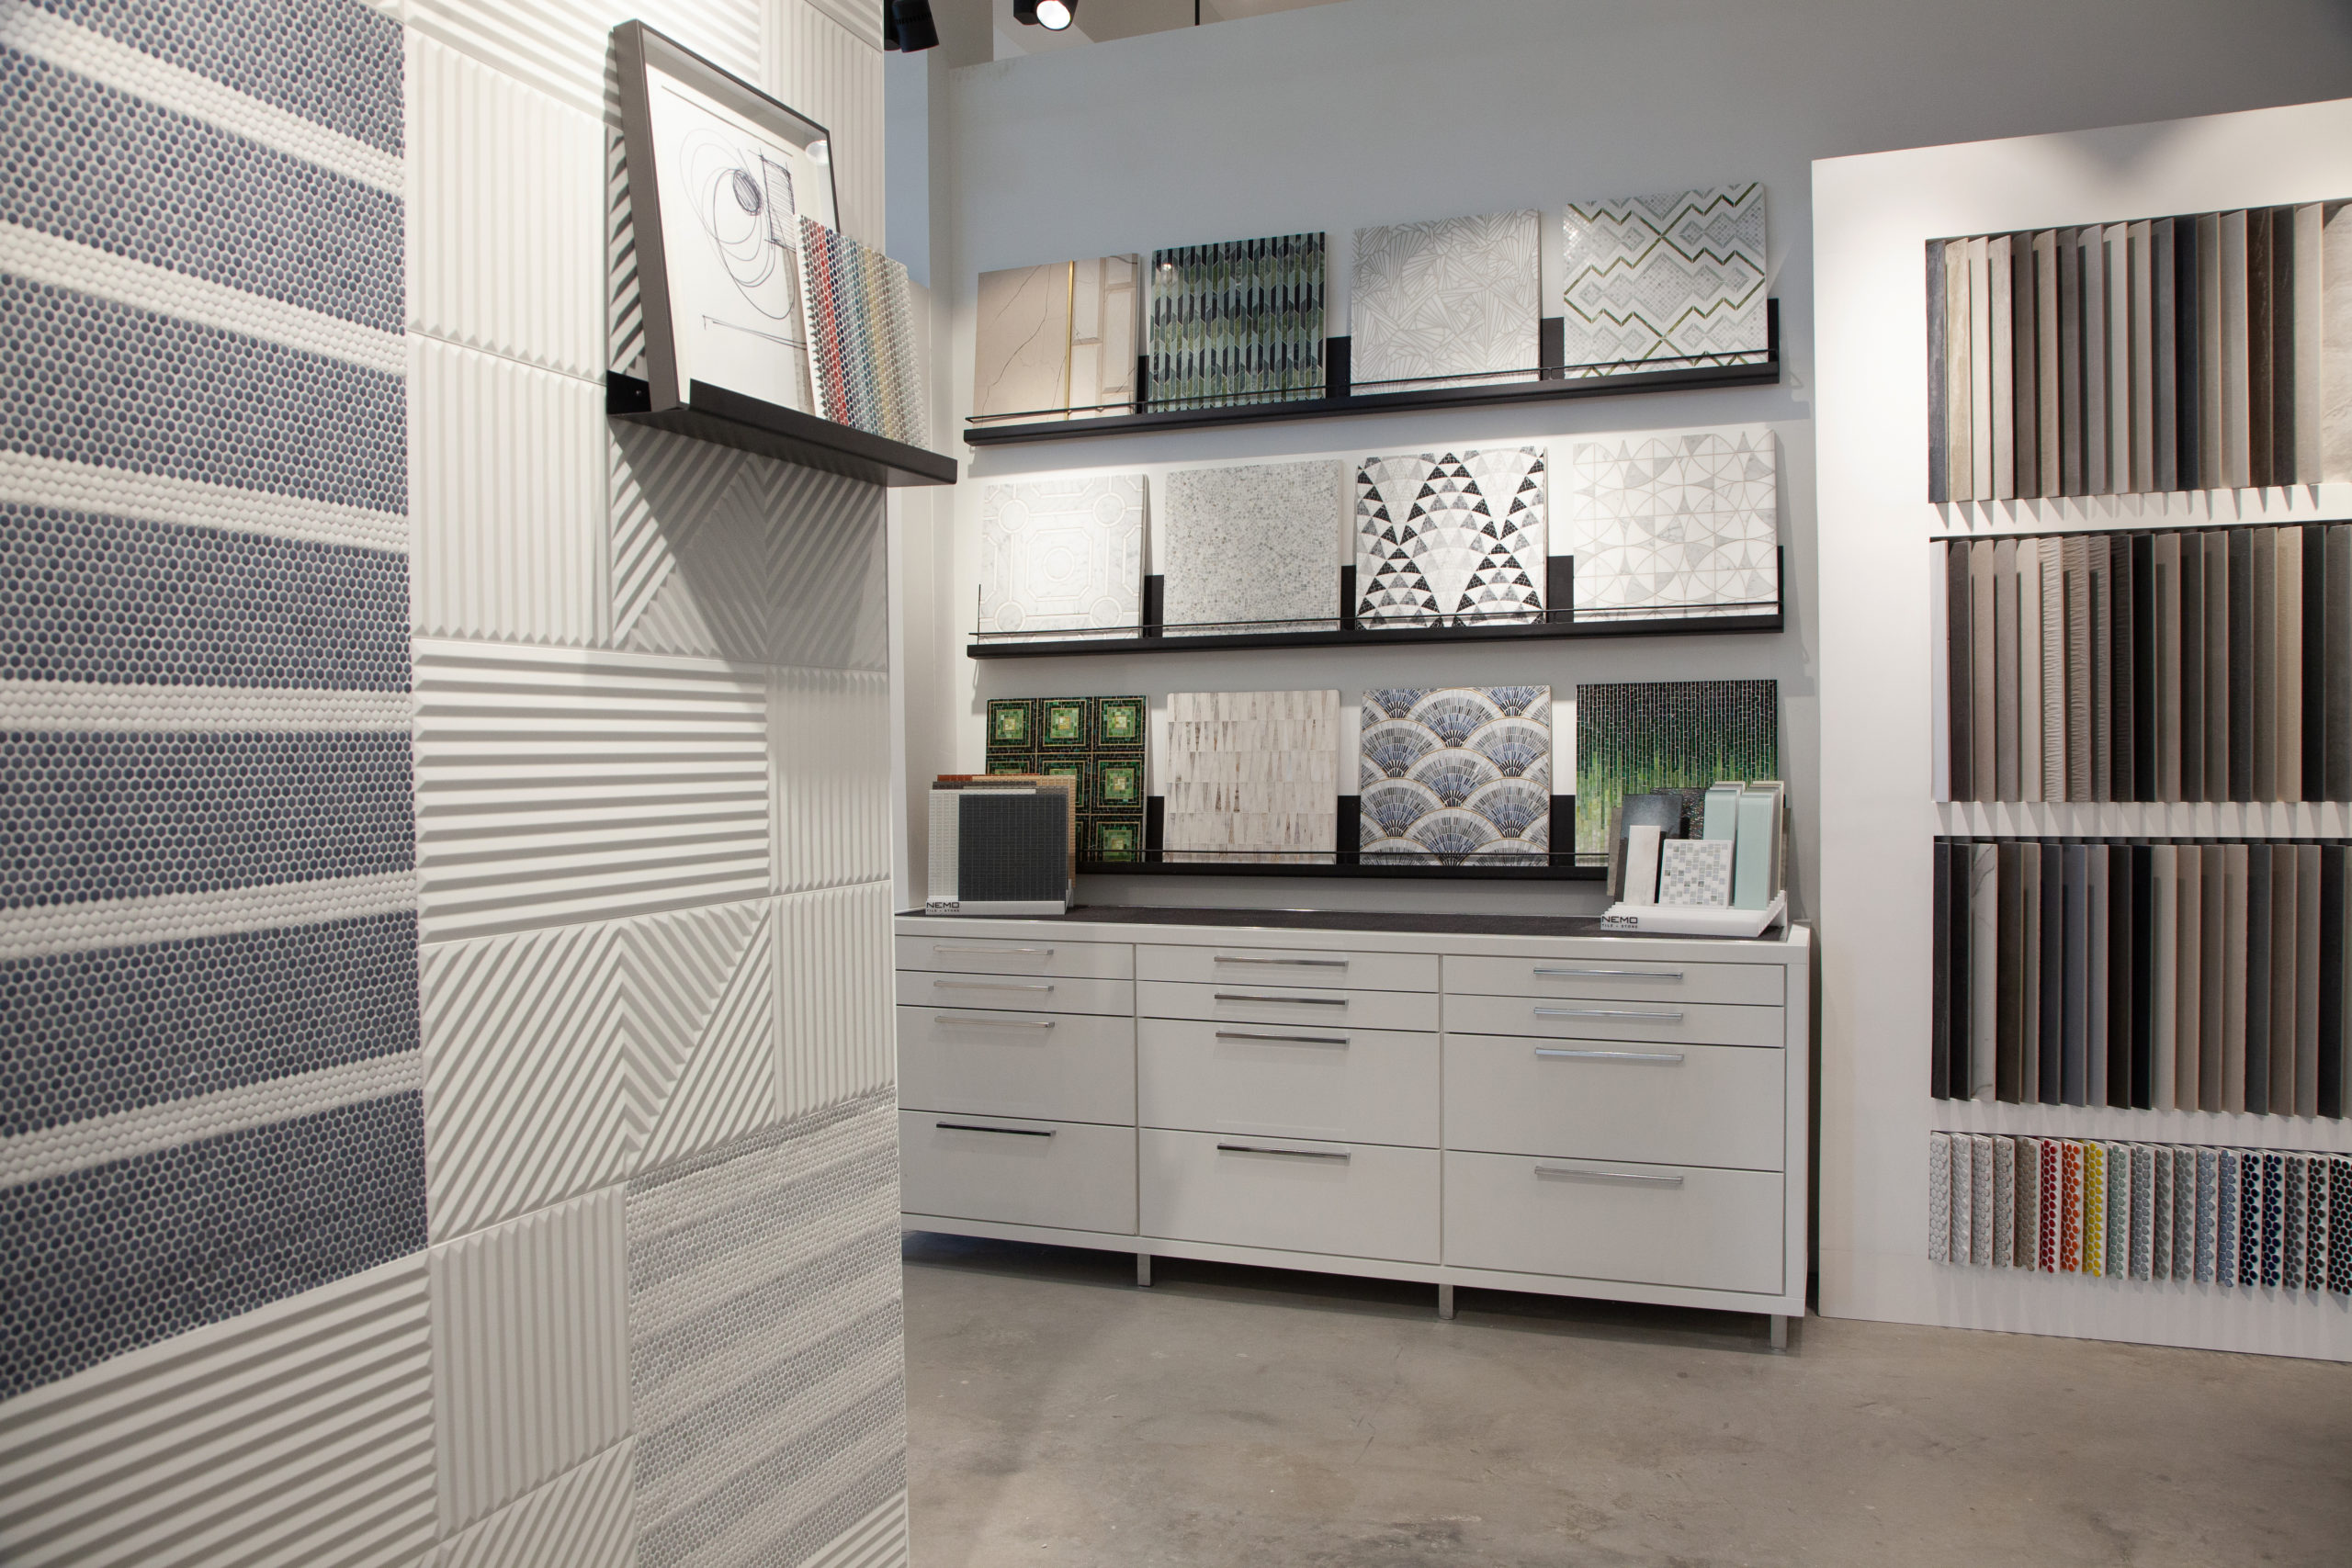 Nemo Tile + Stone, the 100-year-old surfacing materials company, based in New York City, has opened a 5,700-square-foot showroom on Flying Point Road in Southampton.